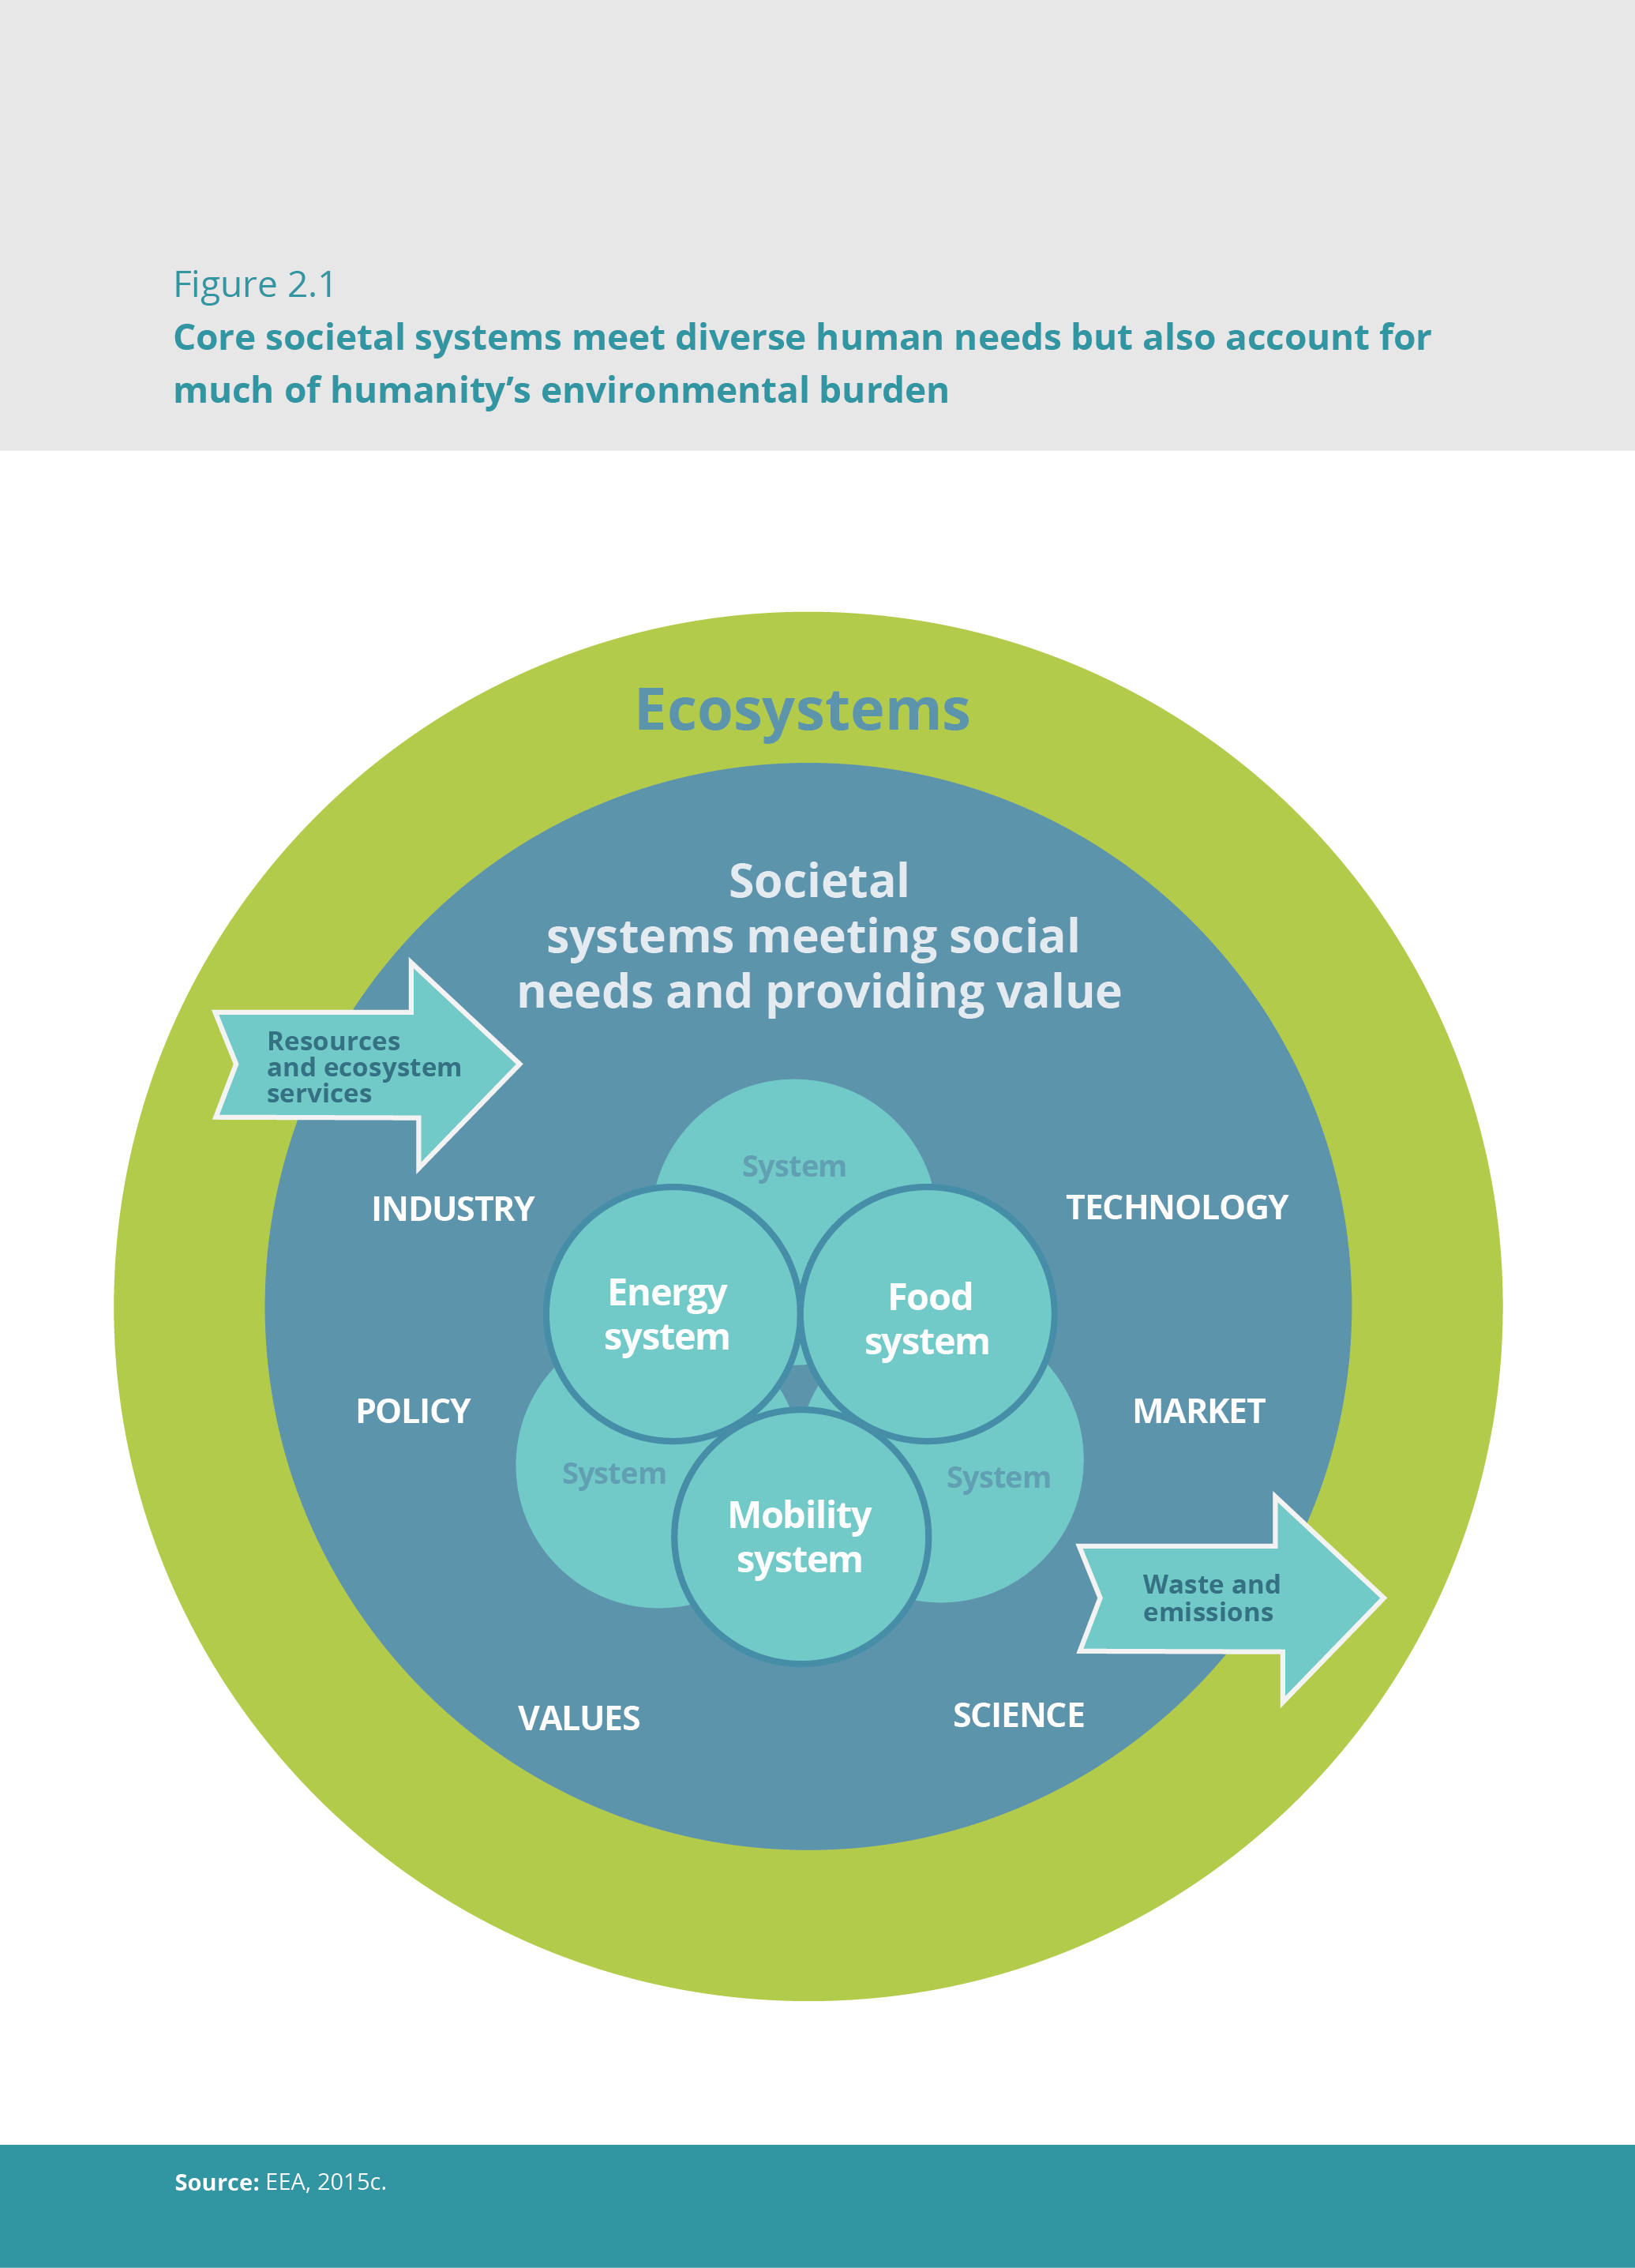 Core societal systems meet diverse human needs but also account for much of humanity's environmental burden